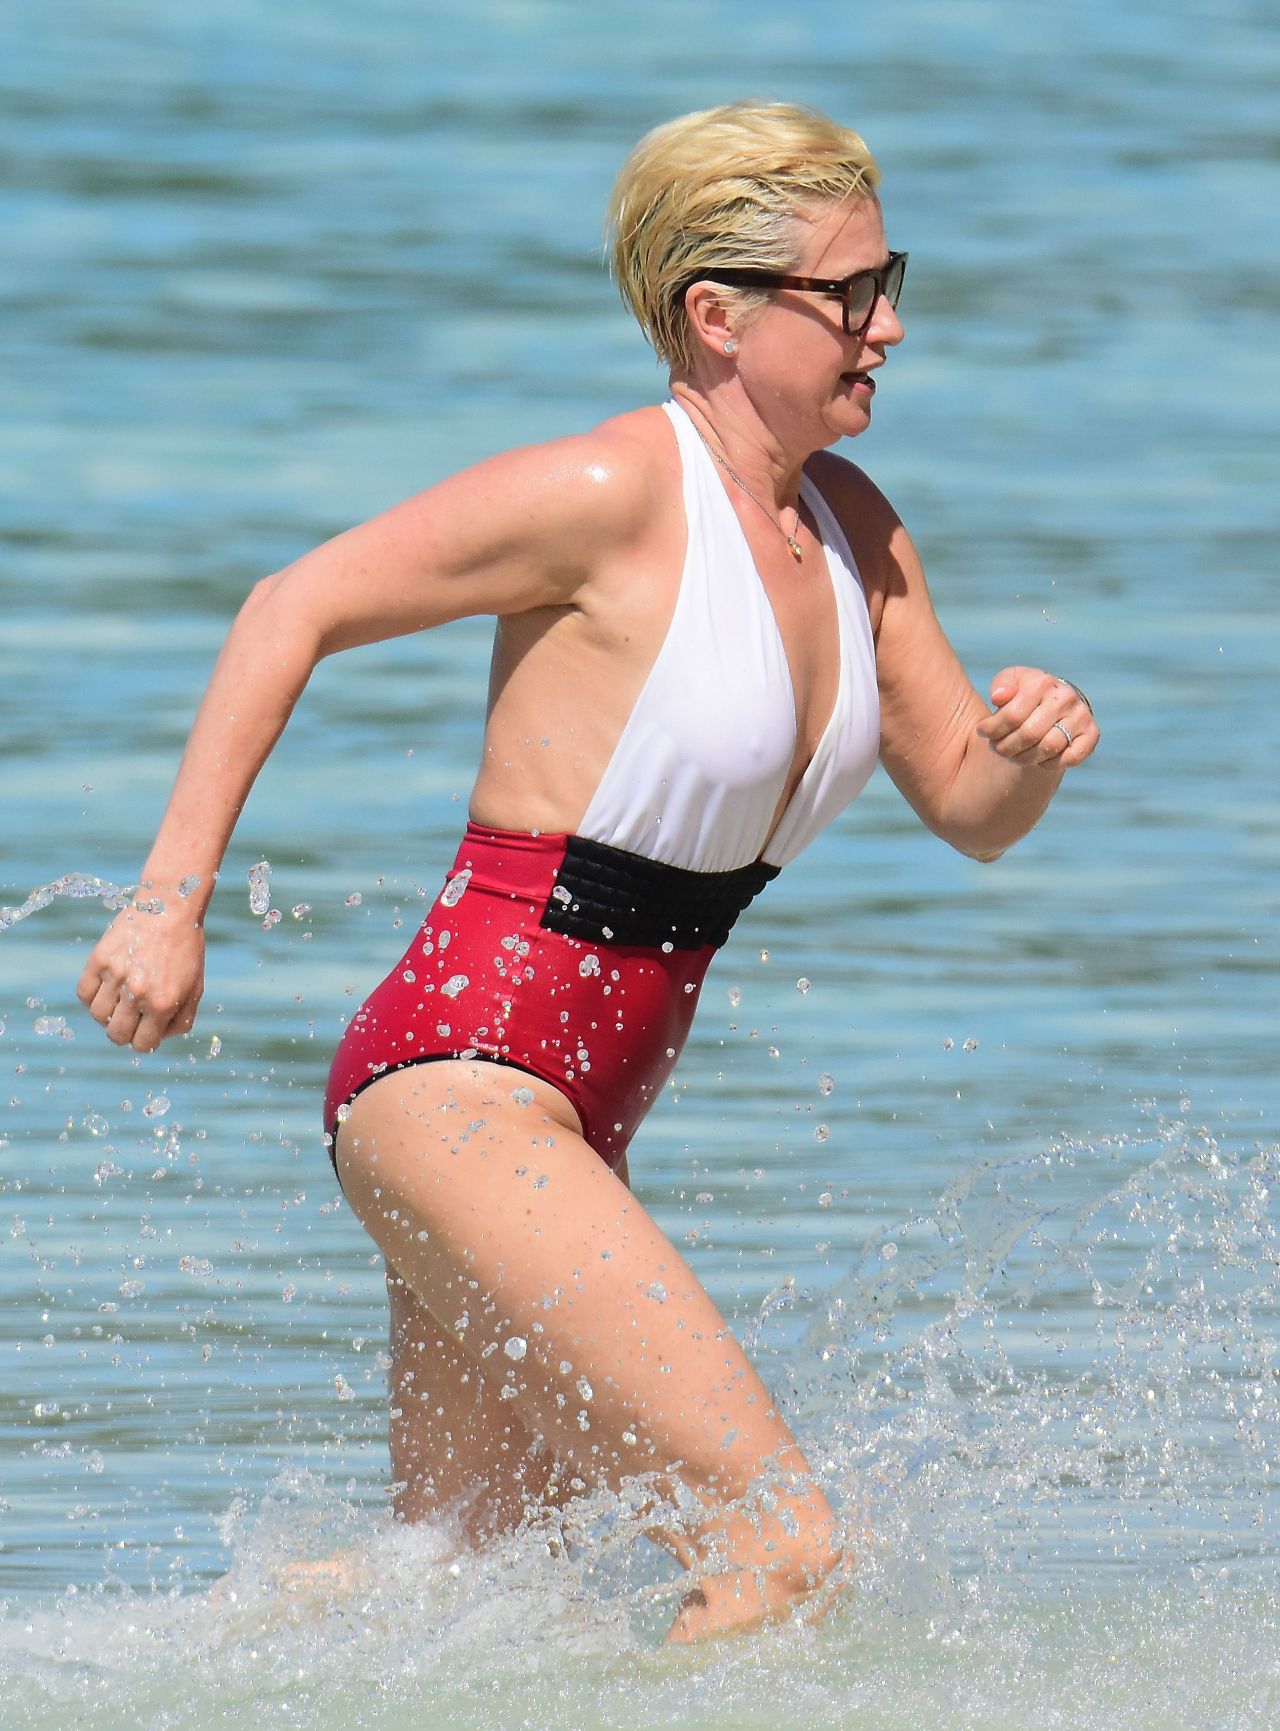 Emma Forbes in Red & White Swimsuit - Barbados 12/22/2017